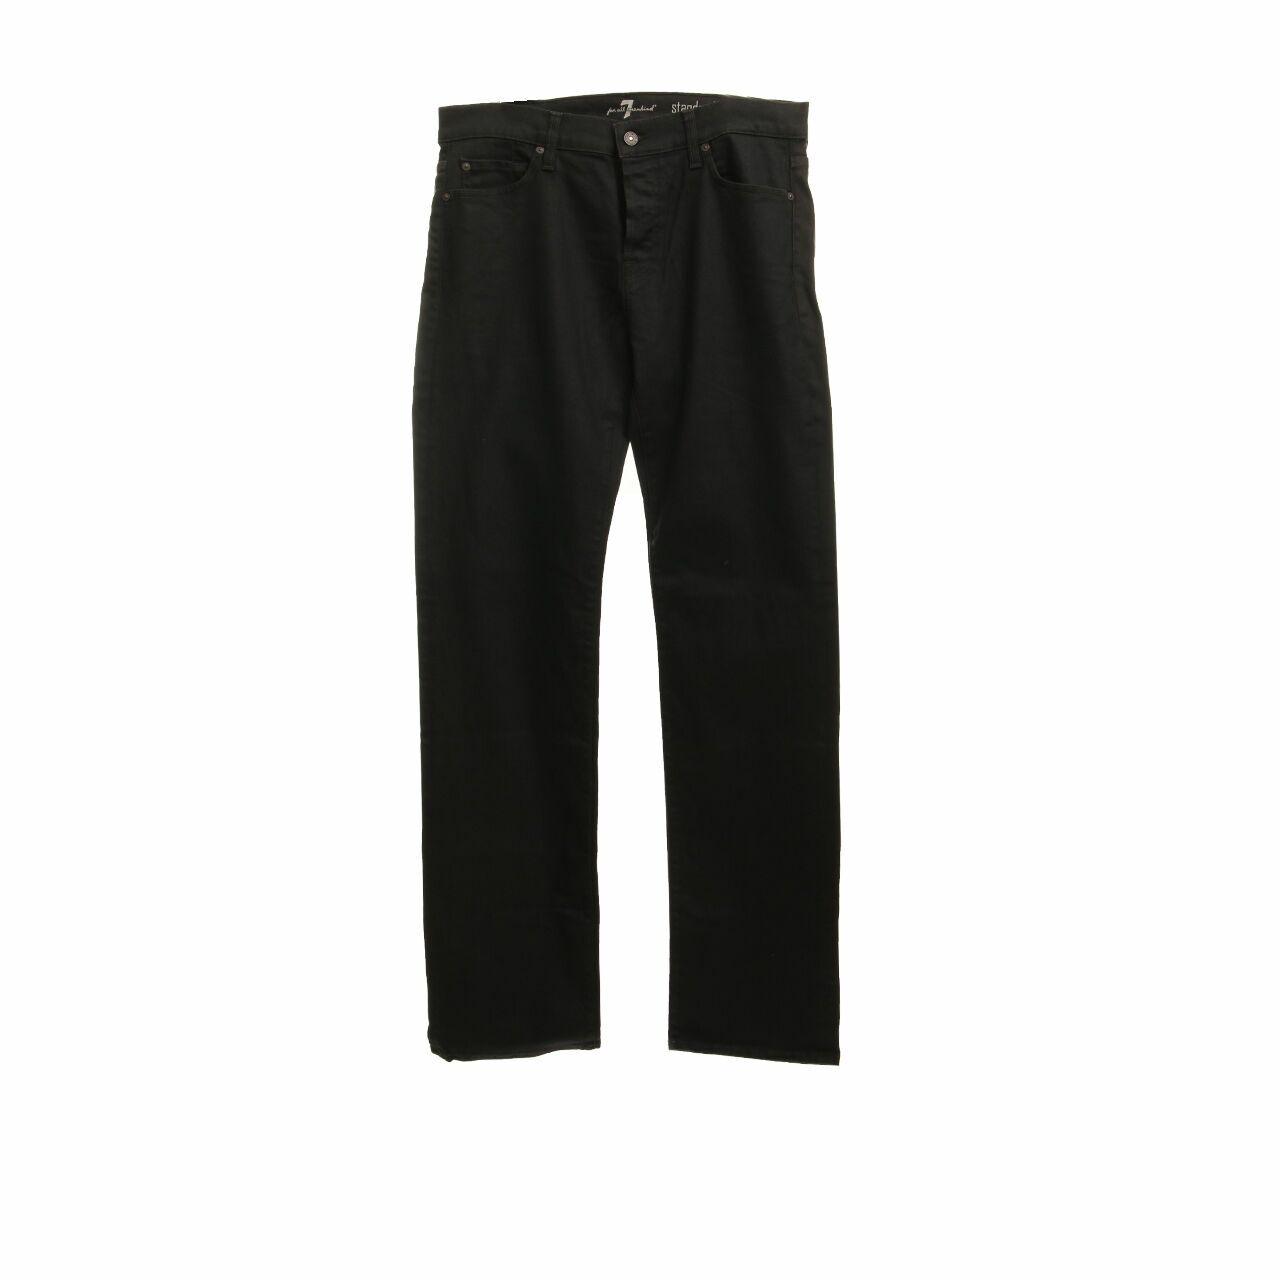 7 For All Mankind Dark Grey Standard Long Pants